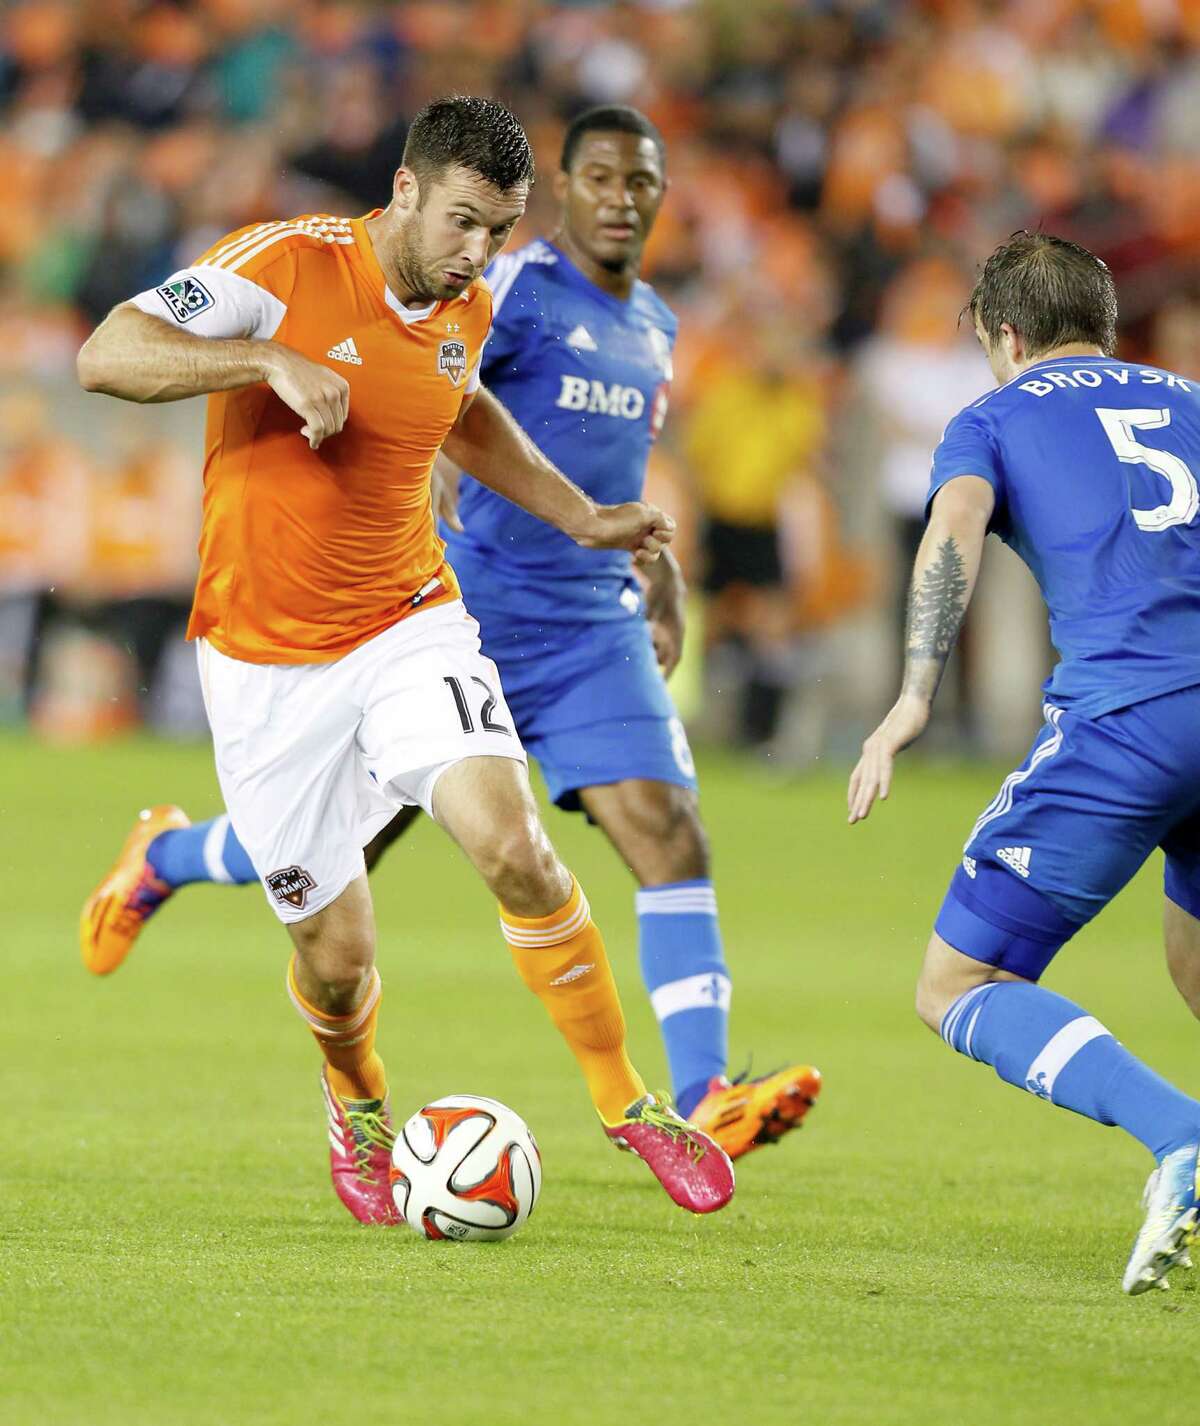 3/15/14: Houston Dynamo forward Will Bruin (12) dribbles against Montreal Impact midfielder Jeb Brovsky (5) in the first half at BBVA Compass Stadium in Houston, Texas.